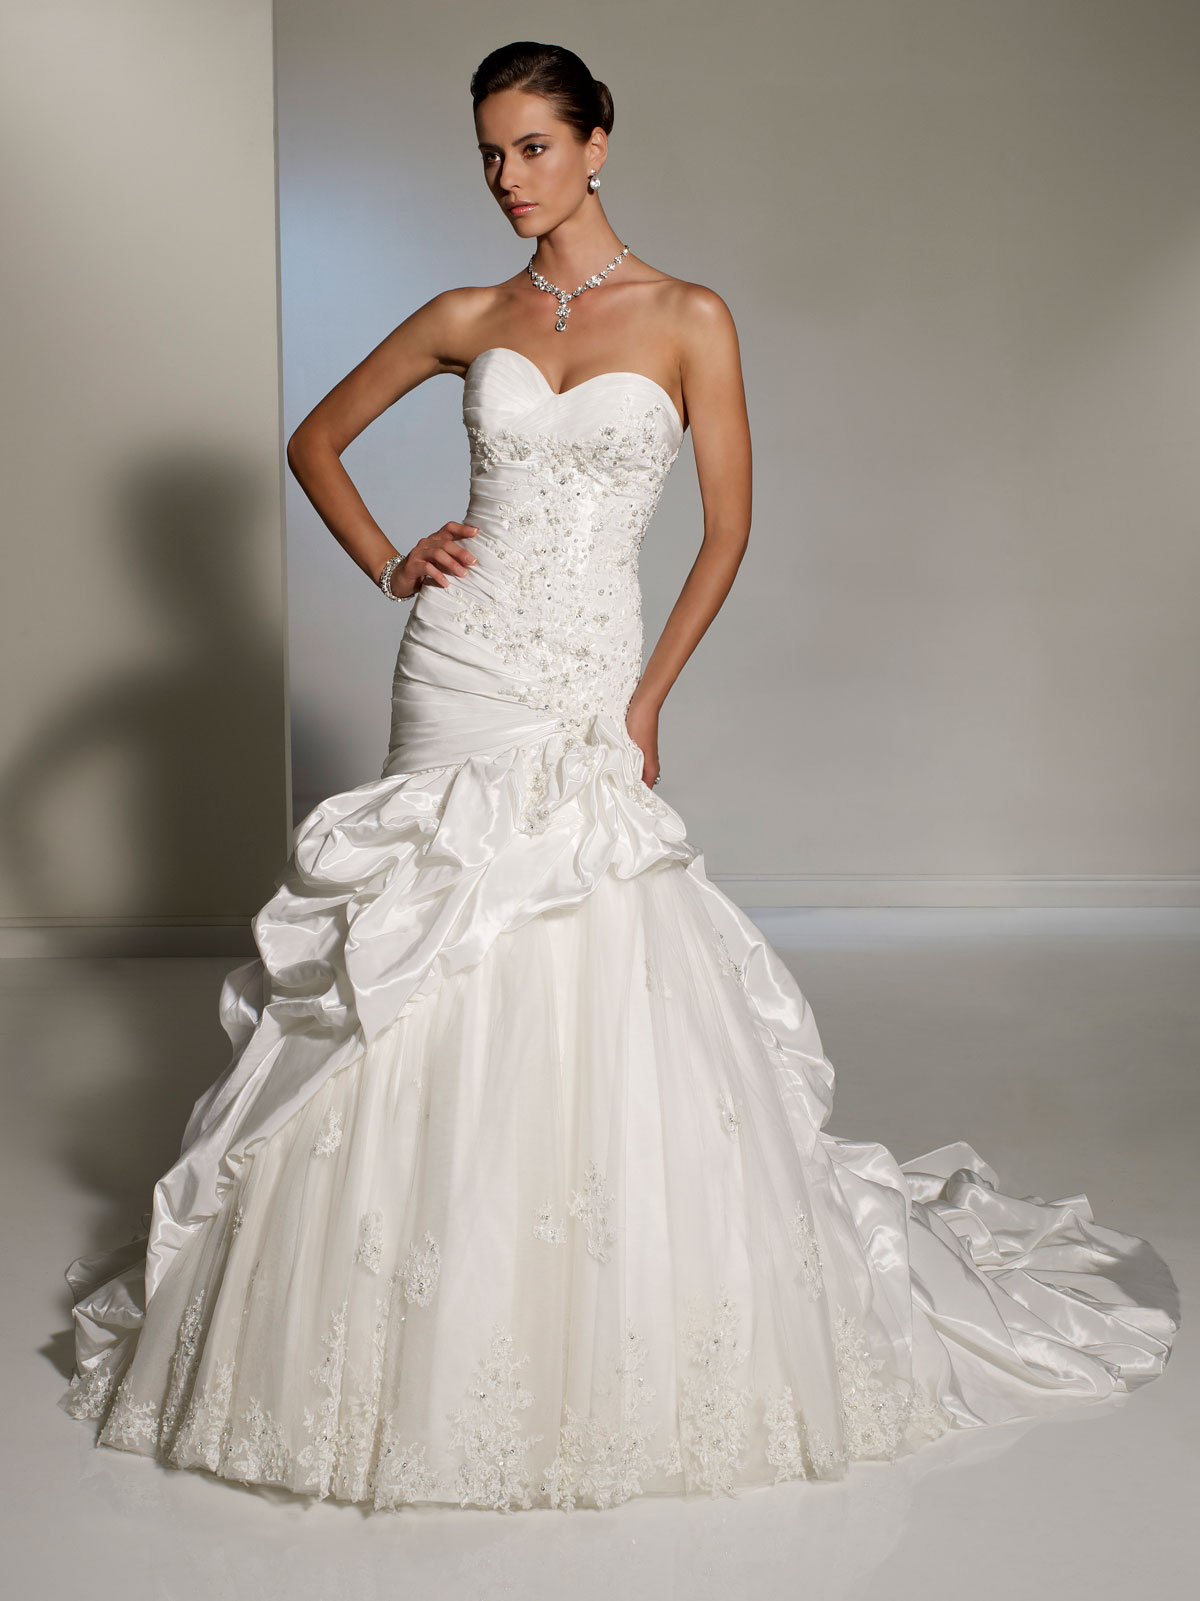 Wedding Gowns Pick up Styles.